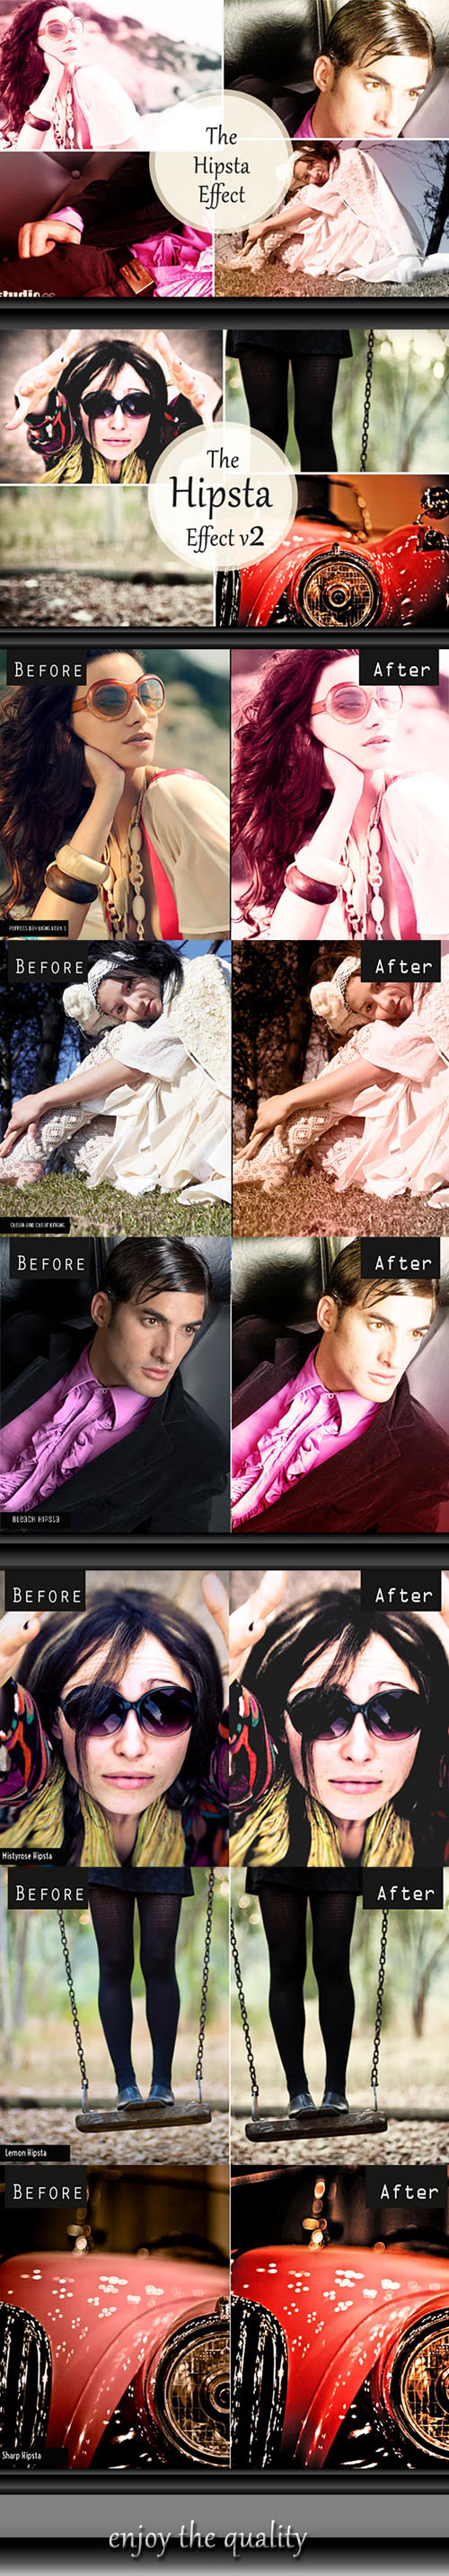 6 Hipsta Effect Photoshop Actions (RAW/JPEG)